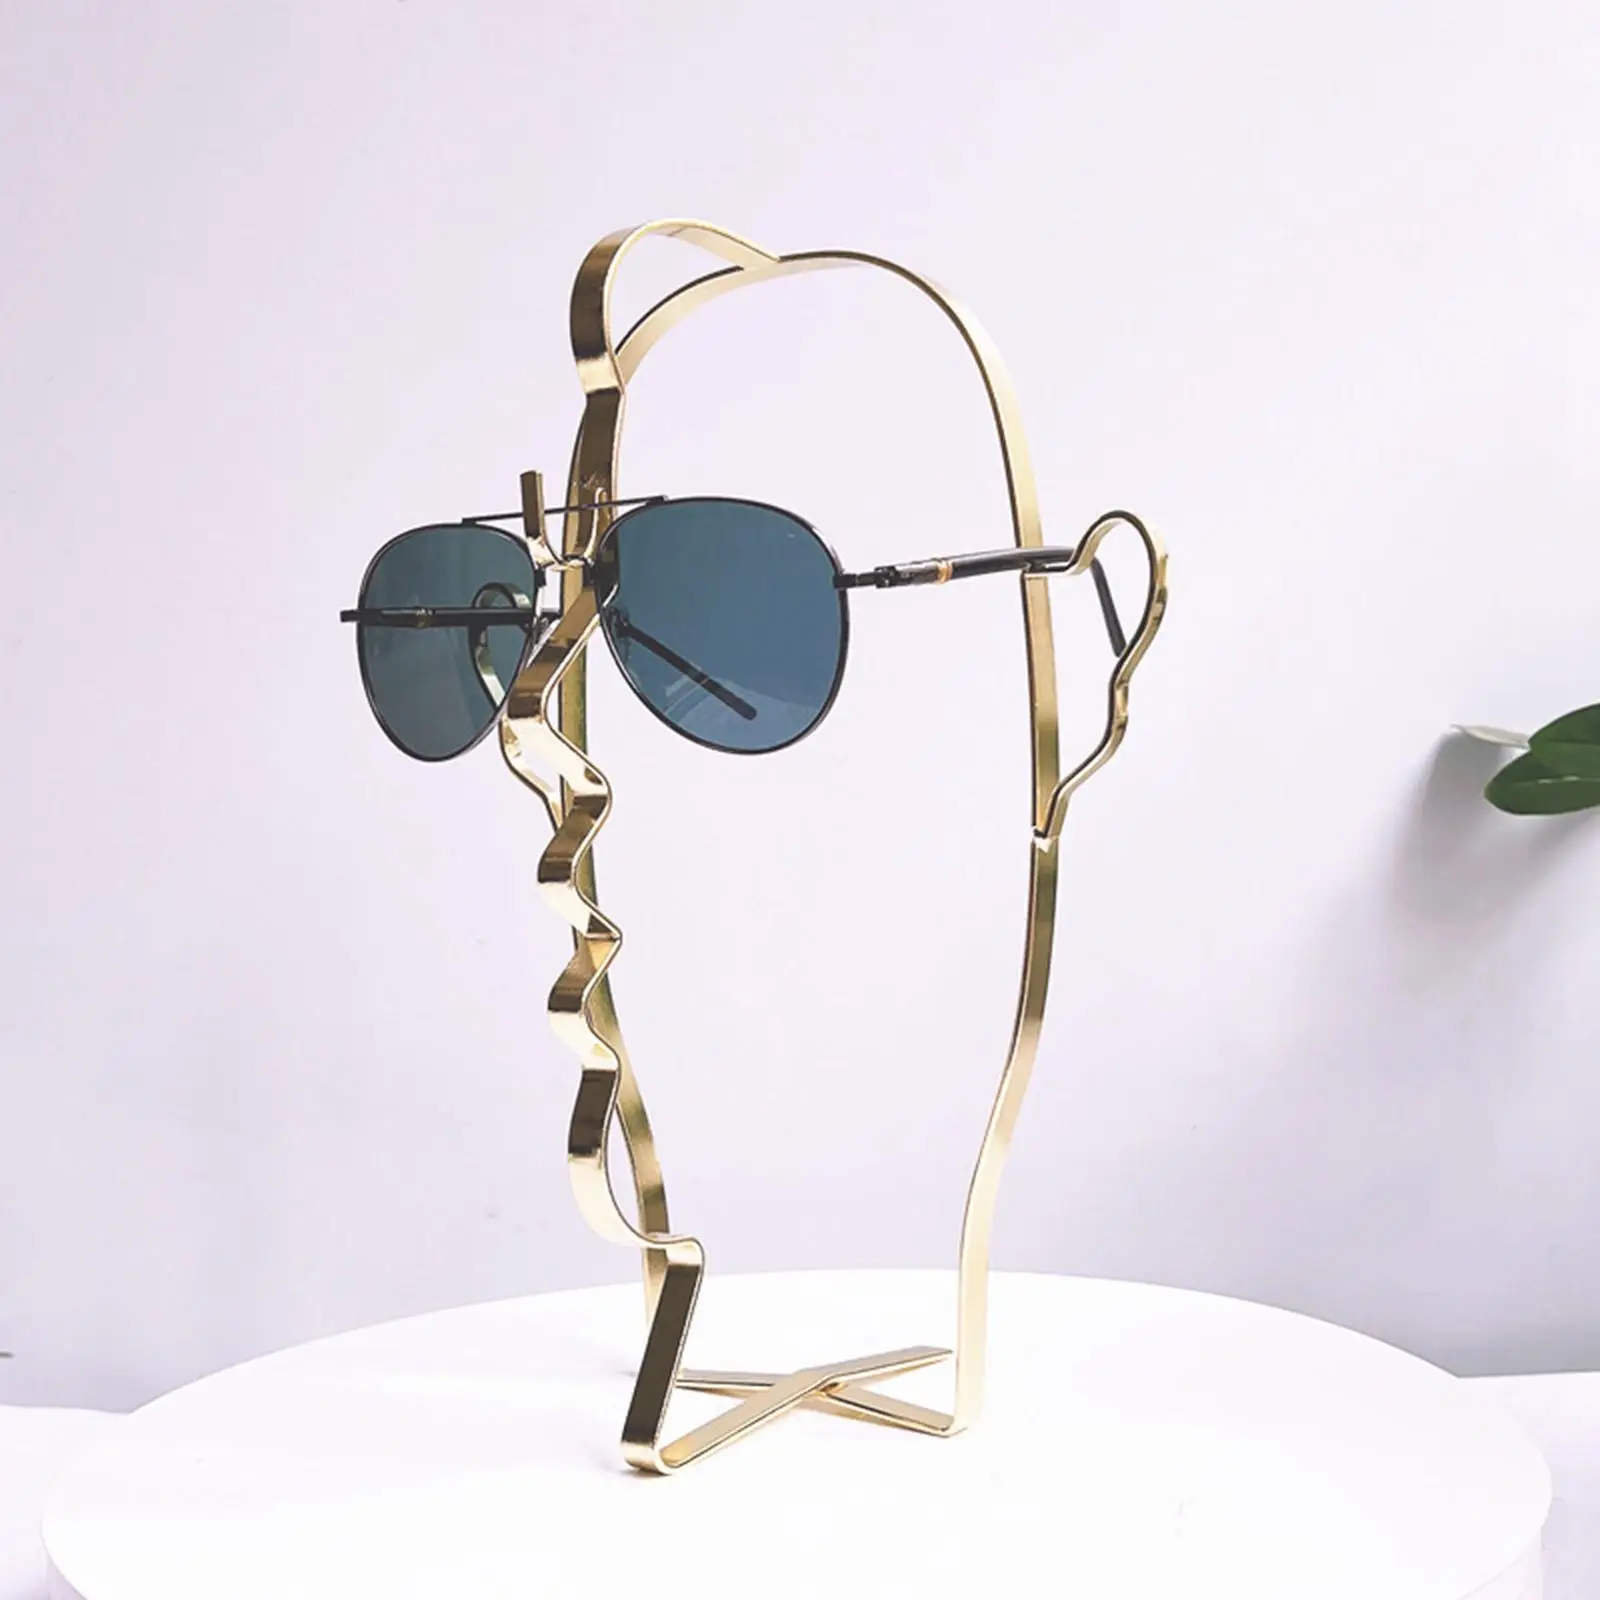 Sunglasses Display Stand Glasses Storage Organizer Character Modeling Iron Glasses Storage Rack for Stores Dressing Room Desk